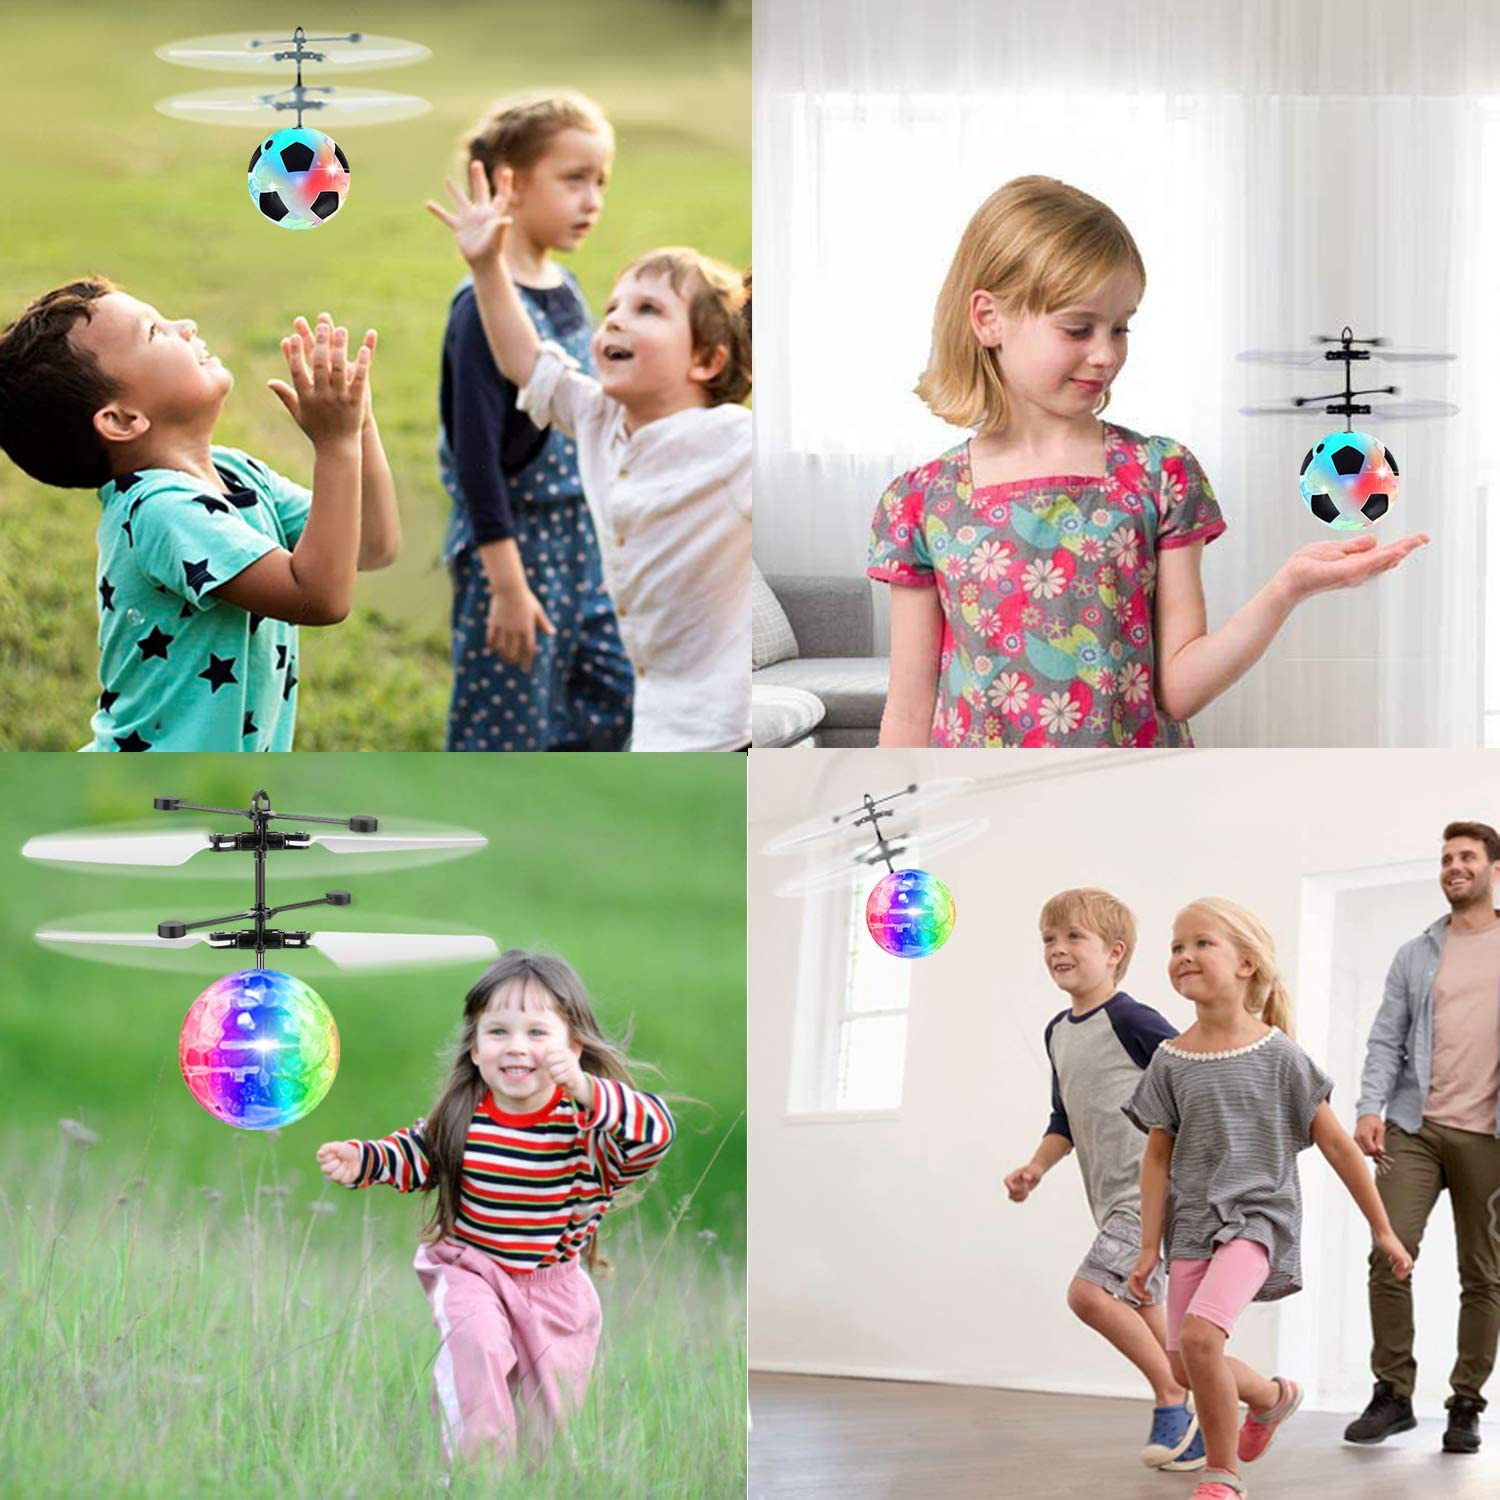 Aircraft Toy 2 Pack Flying Ball Toys Drones, RC Flying Toy for Kids Boys Girls Gifts Hand Controlled Helicopter Infrared Induction Flying Light up Ball with 2 Remote Controller for Indoor Outdoor